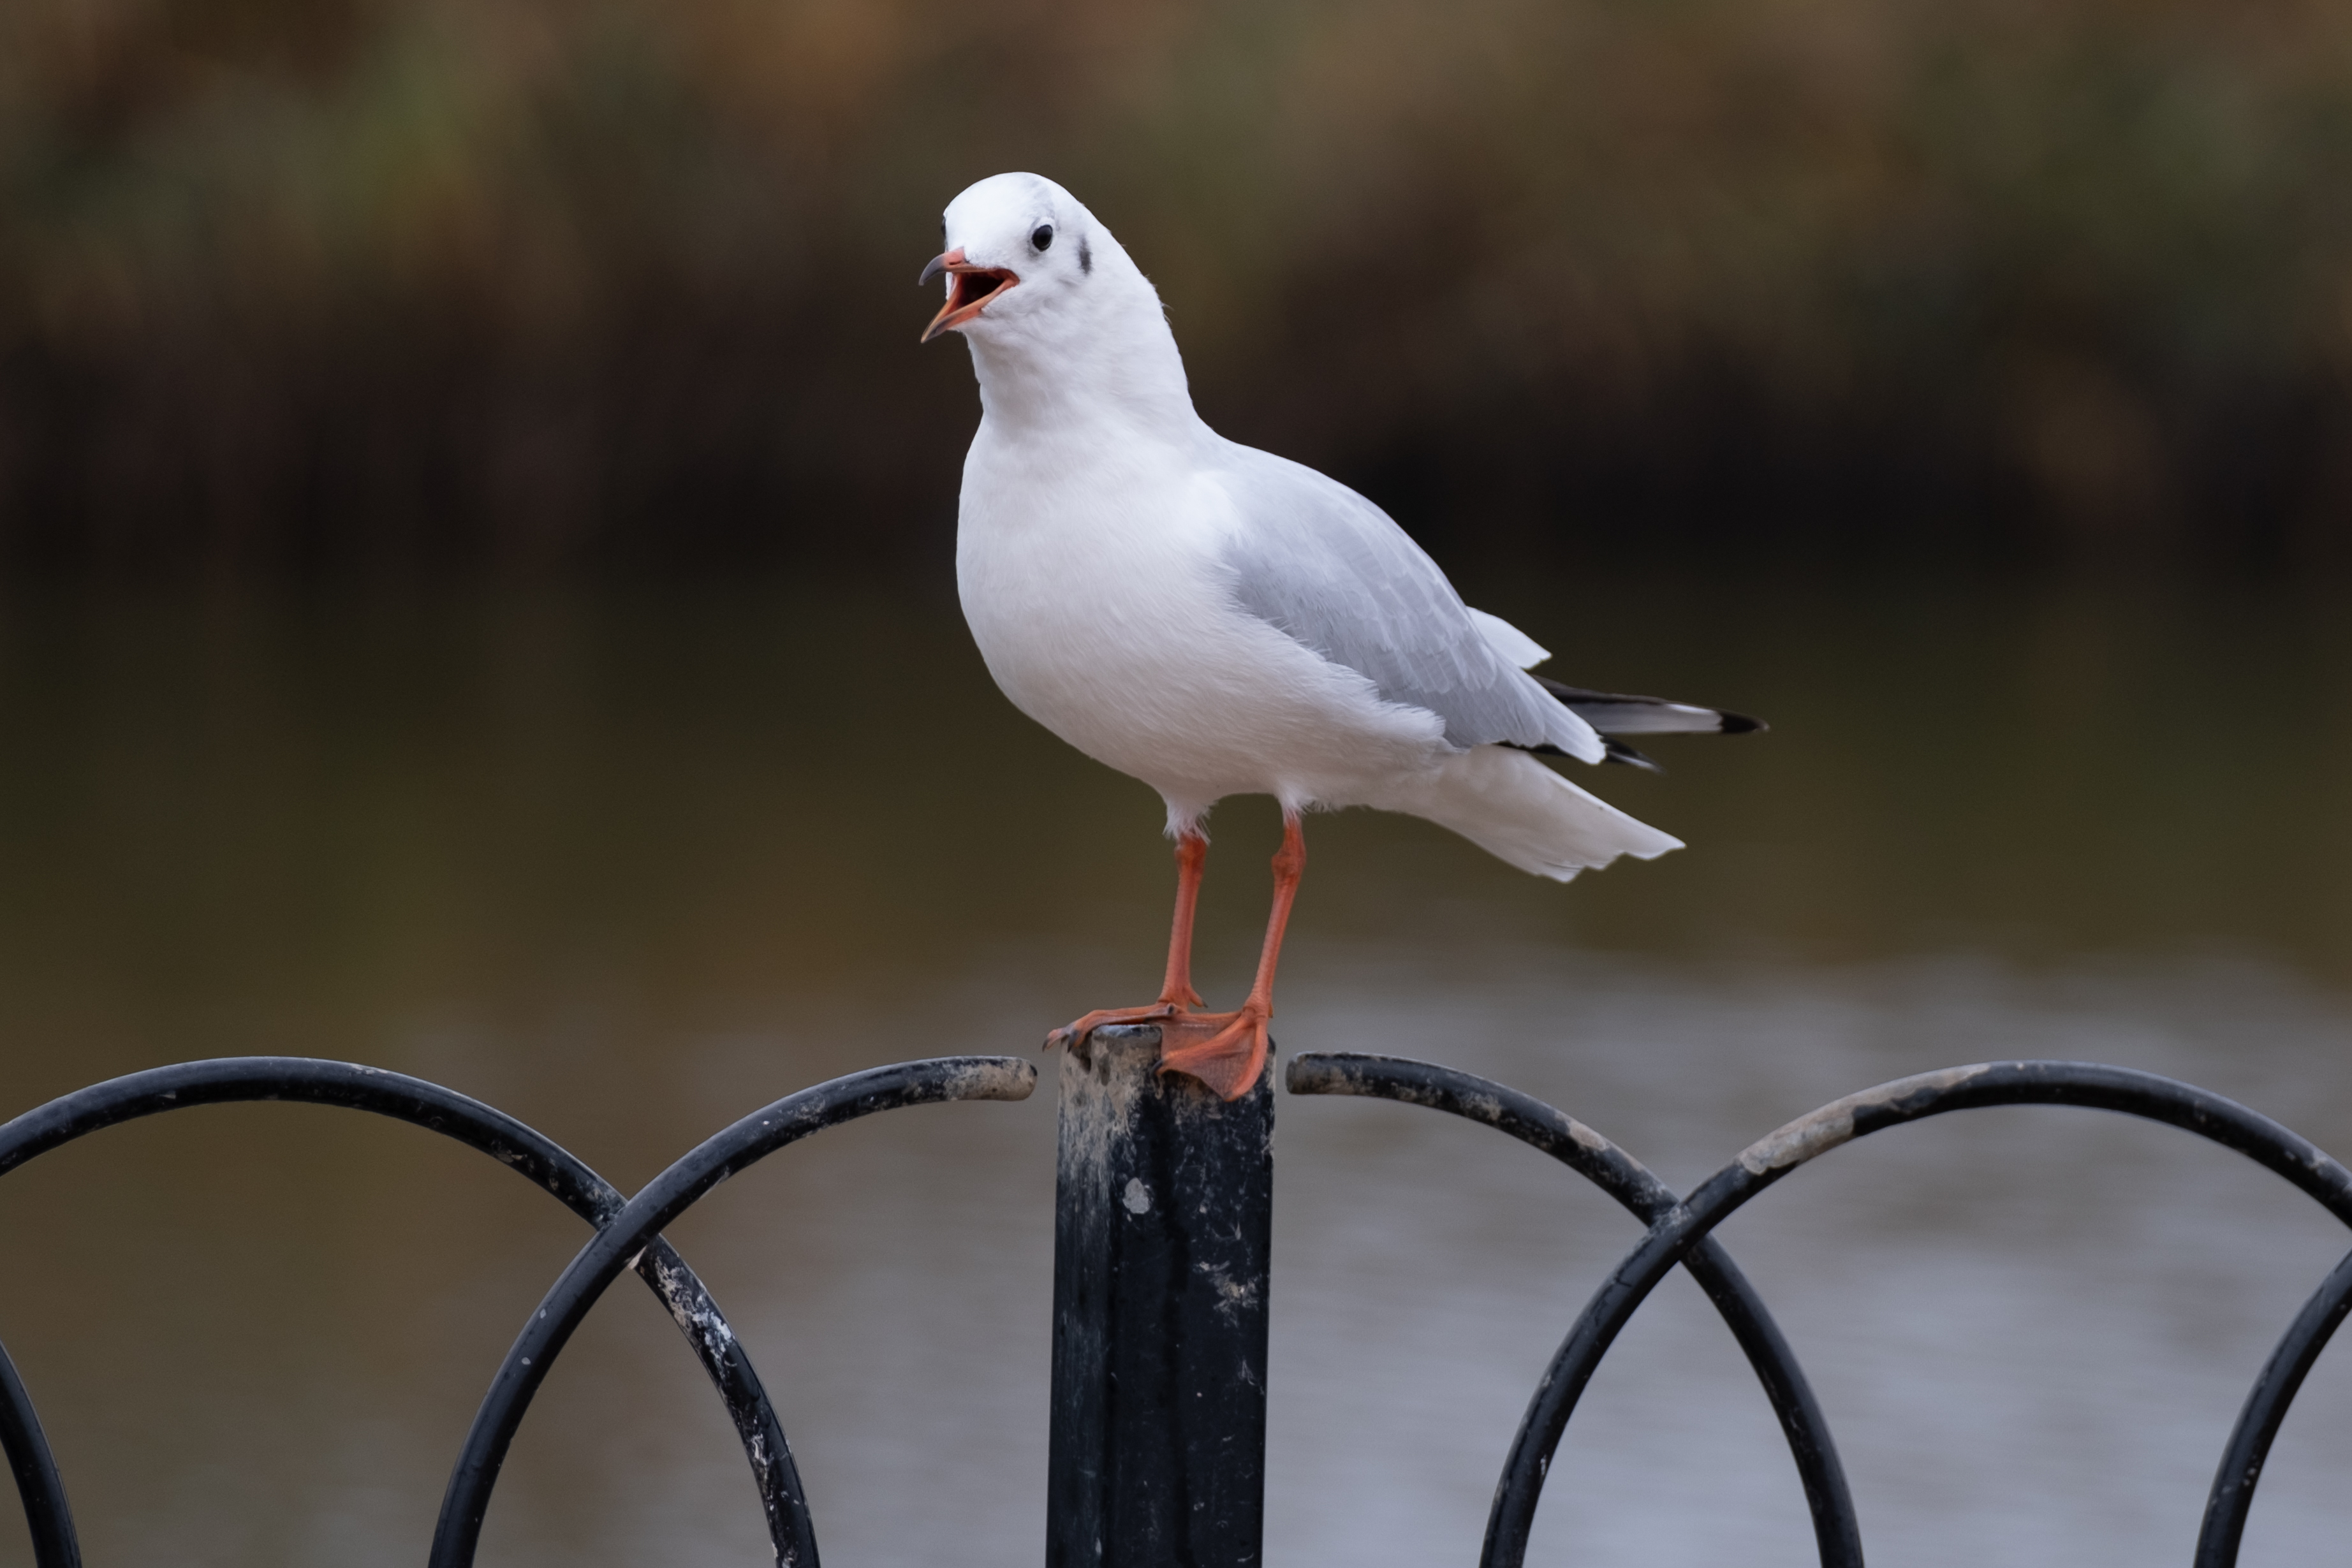 A seagull sitting on a metal fence